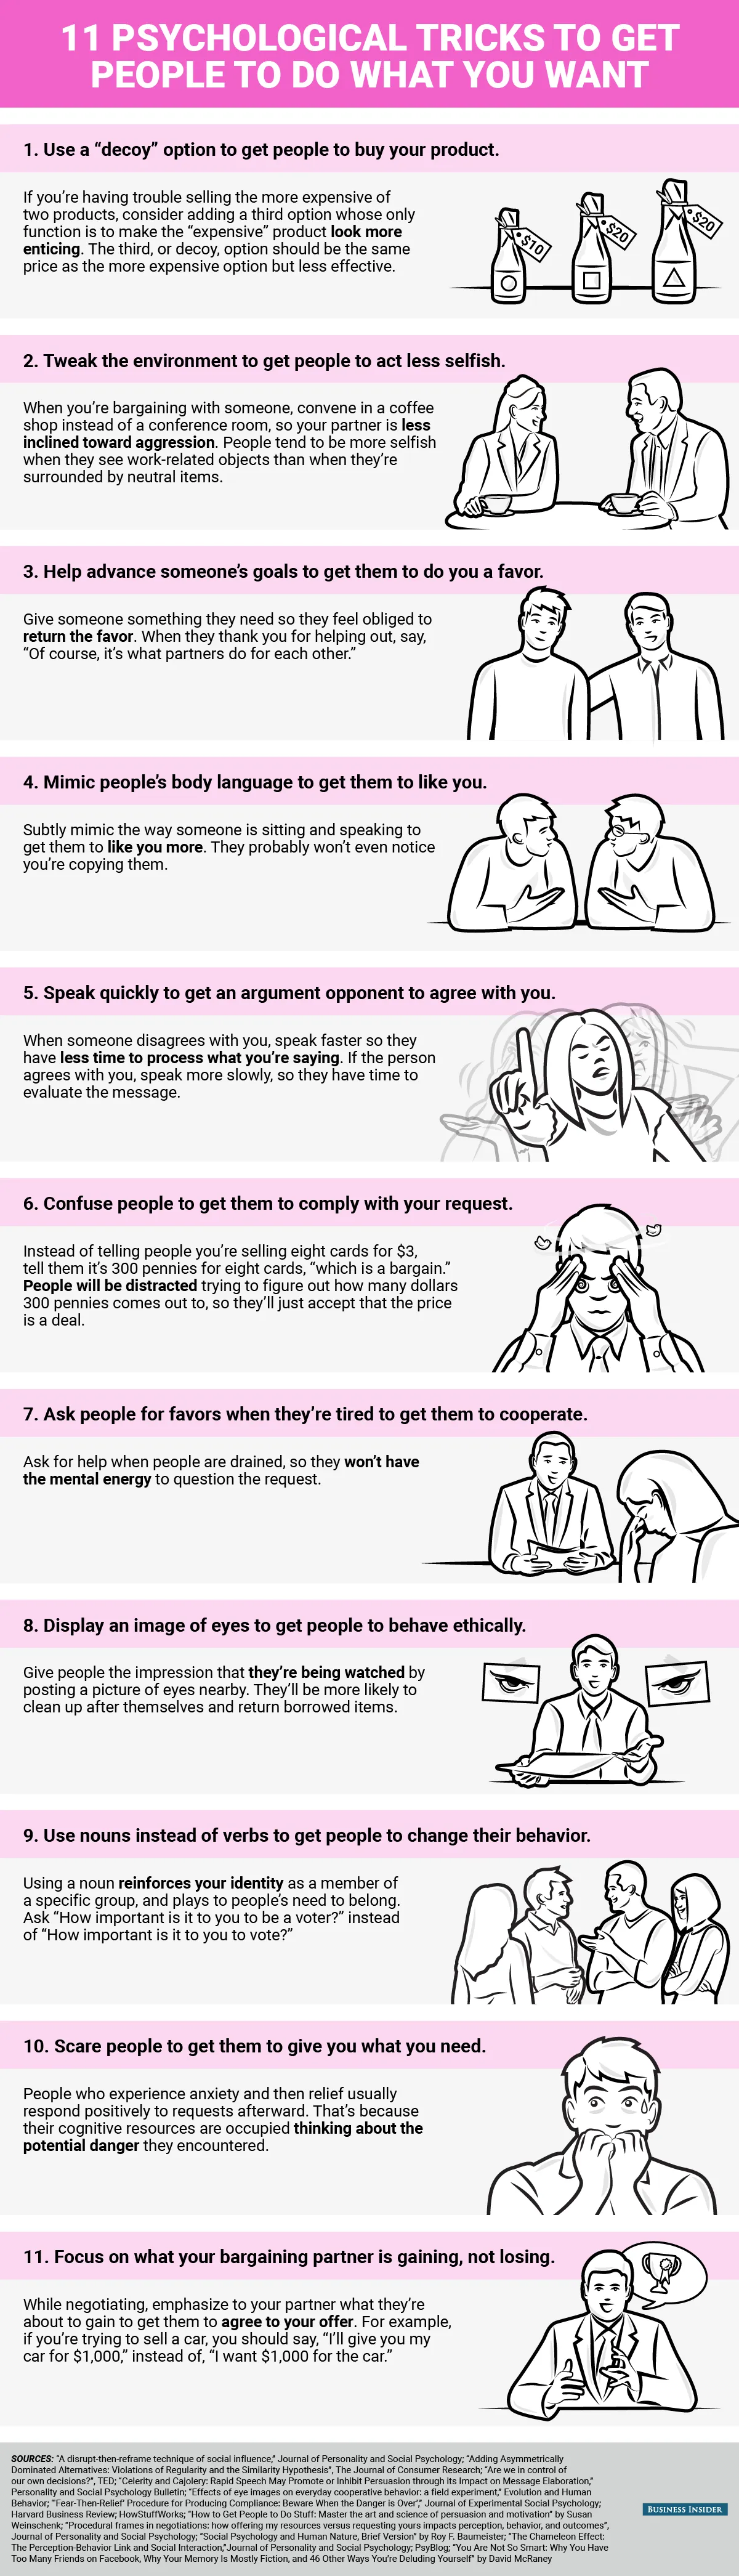 bi graphics 11 psychological tricks to get people to do what you want